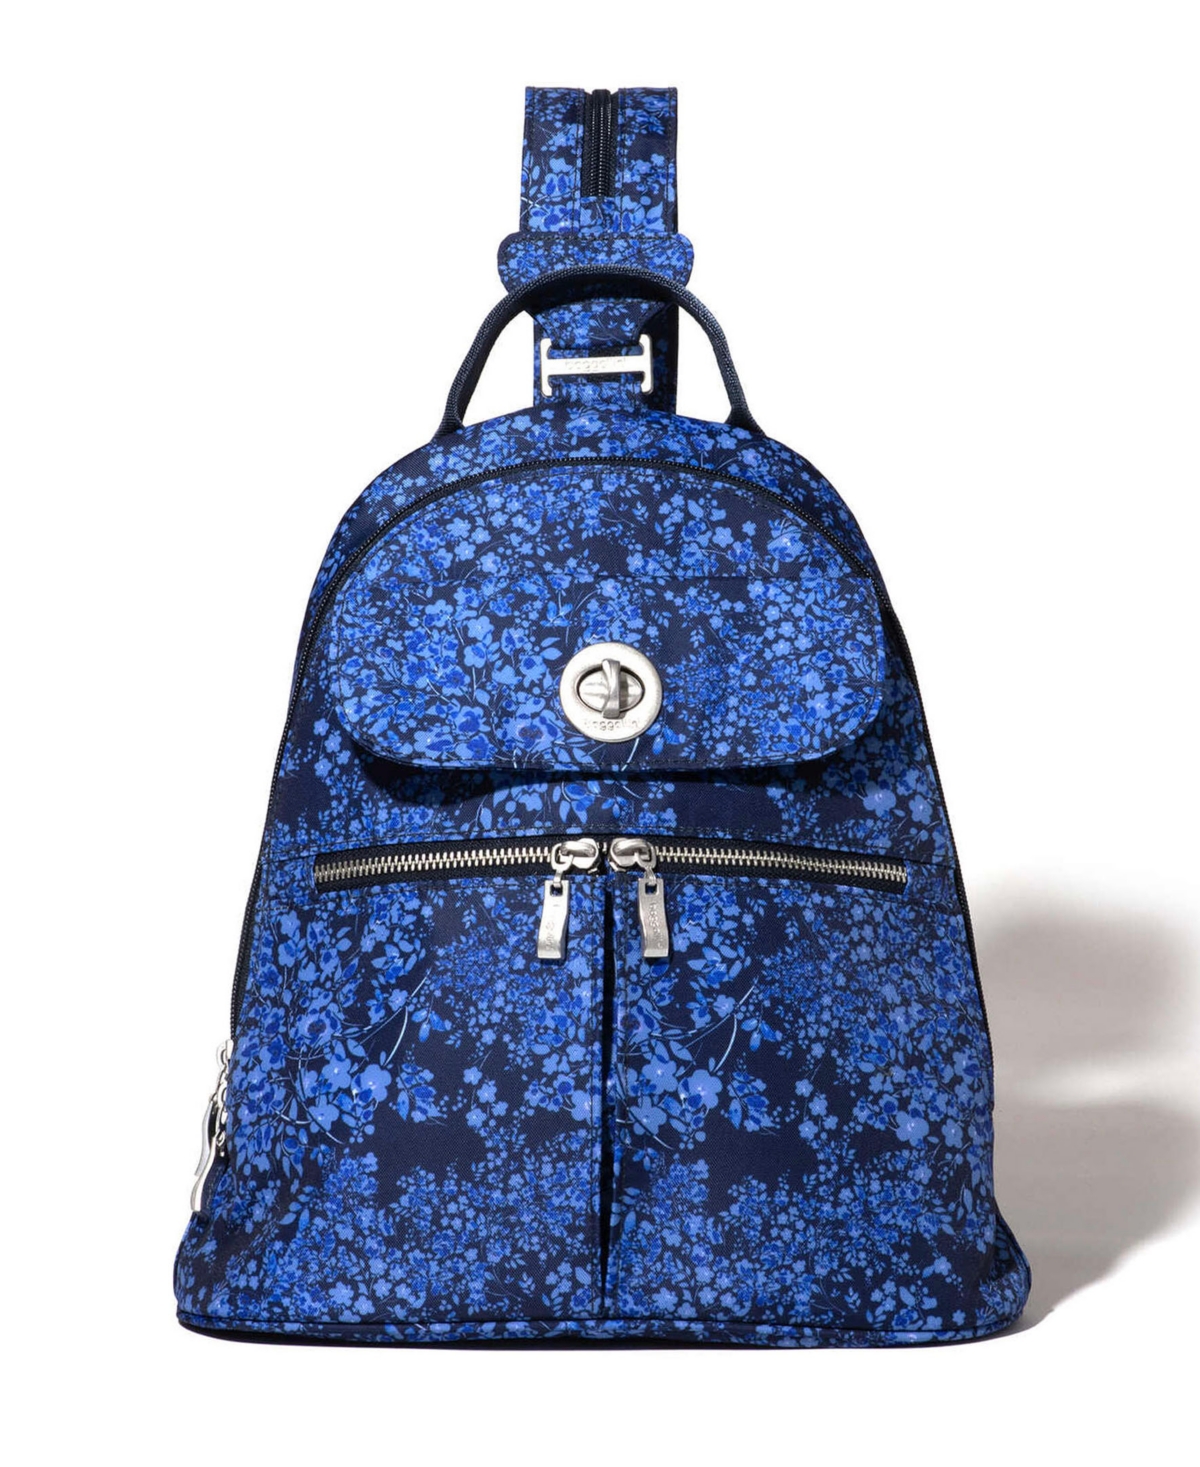 Baggallini Naples Convertible Backpack In Ink Hydran